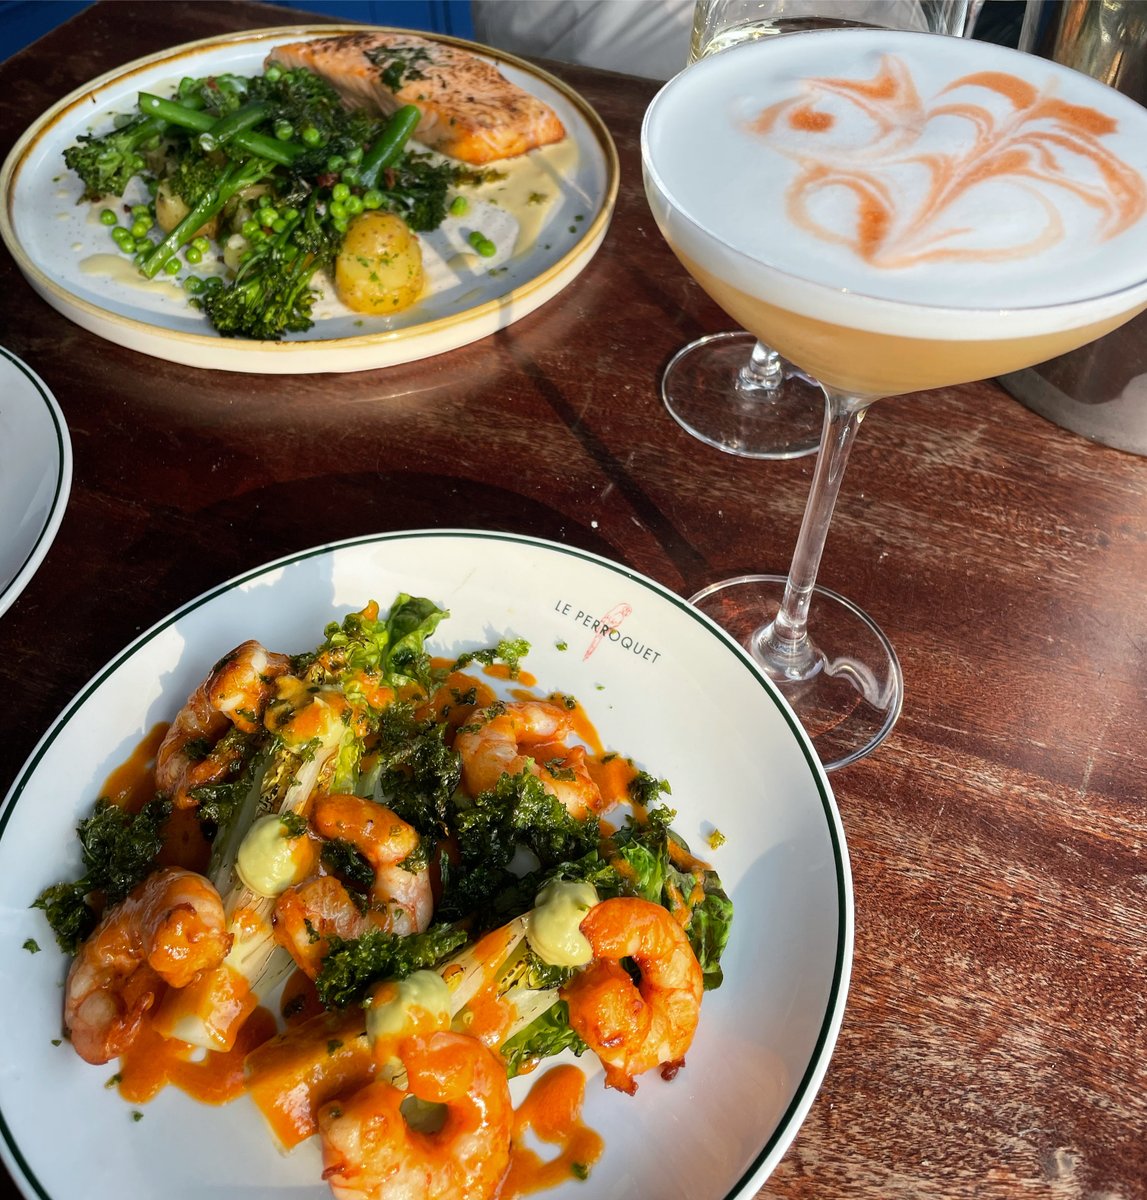 There’s nothing better than al fresco dining in the sun, especially when it includes our pan fried gambas with avocado and nduja sauce, our gorgeous salmon en papilotte and of course our signature 133 sour cocktail. Find us on OpenTable or pop in!